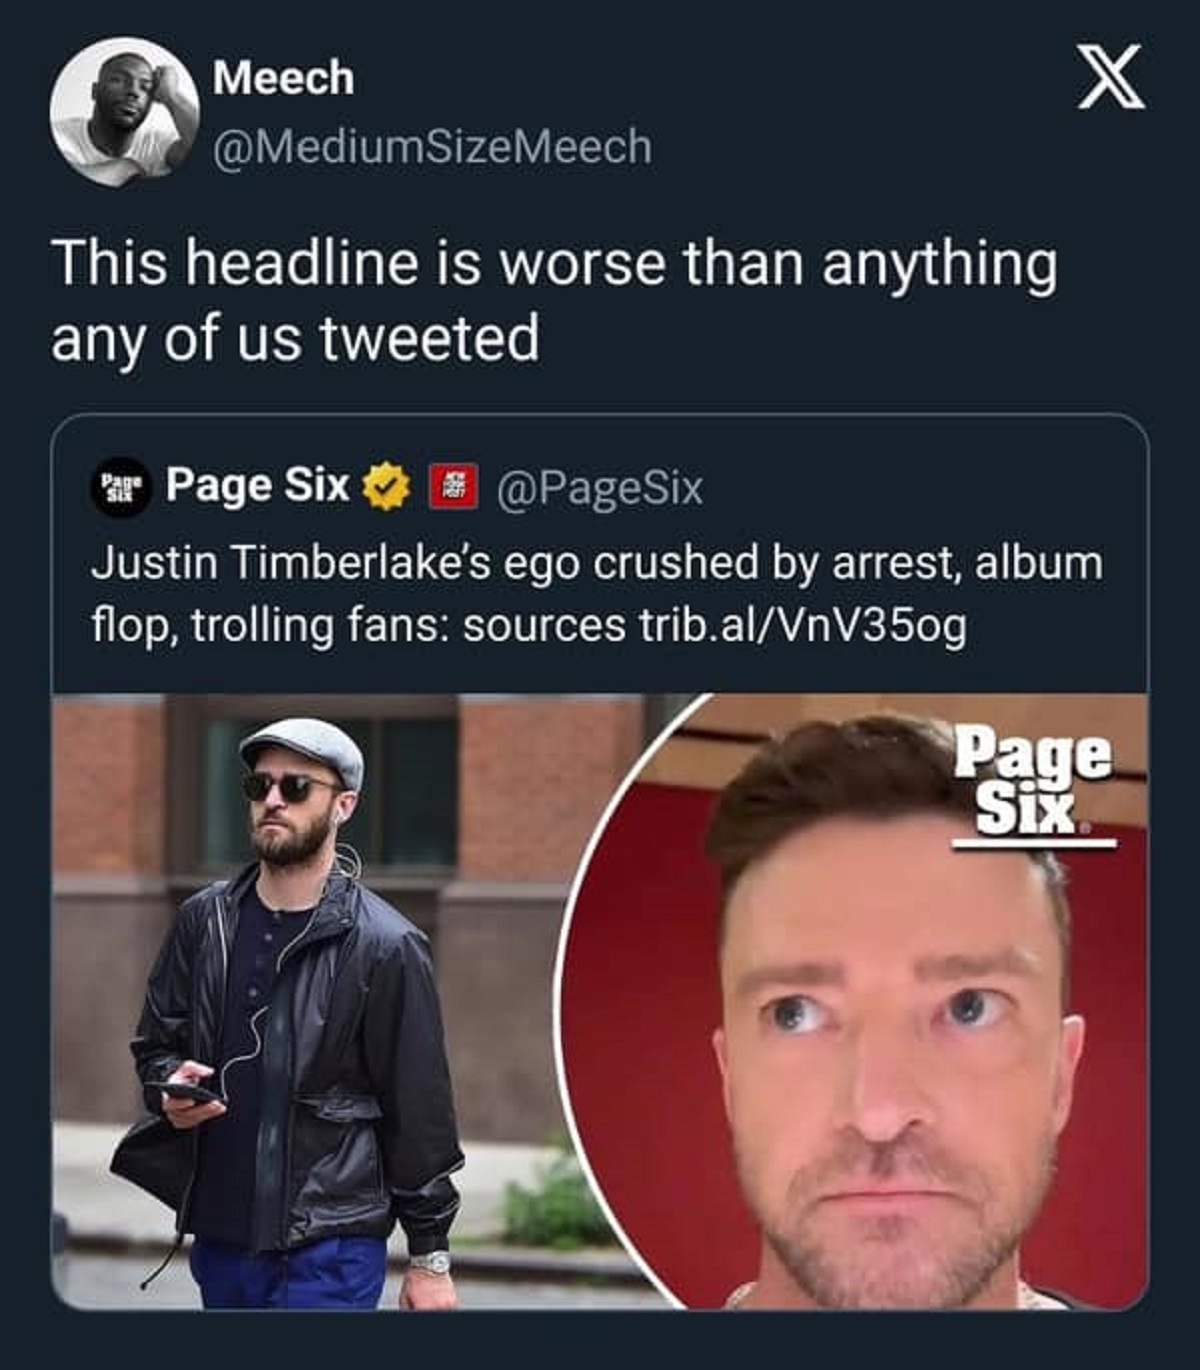 screenshot - Meech SizeMeech This headline is worse than anything any of us tweeted Page Six X Justin Timberlake's ego crushed by arrest, album flop, trolling fans sources trib.alVnV350g Page Six